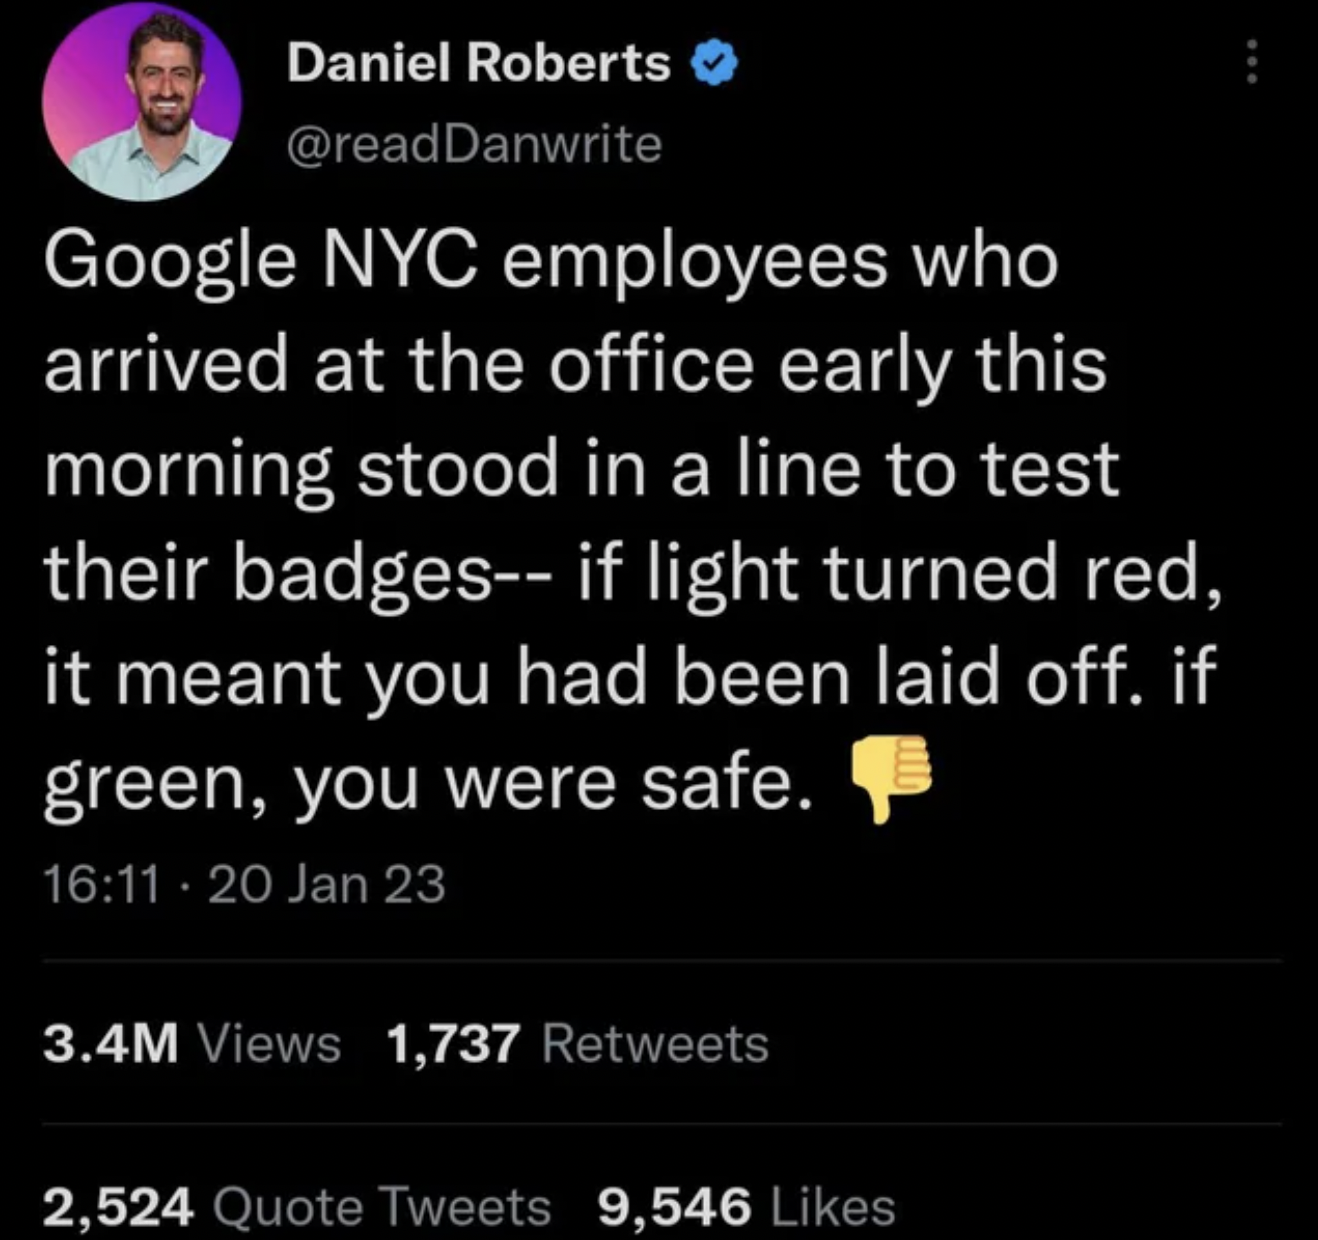 Facepalms - atmosphere - Google Nyc employees who arrived at the office early this morning stood in a line to test their badges if light turned red, it meant you had been laid off. if green, you were safe. 20 Jan 23 3.4M Views 1,737 2,524 Quote Tweets